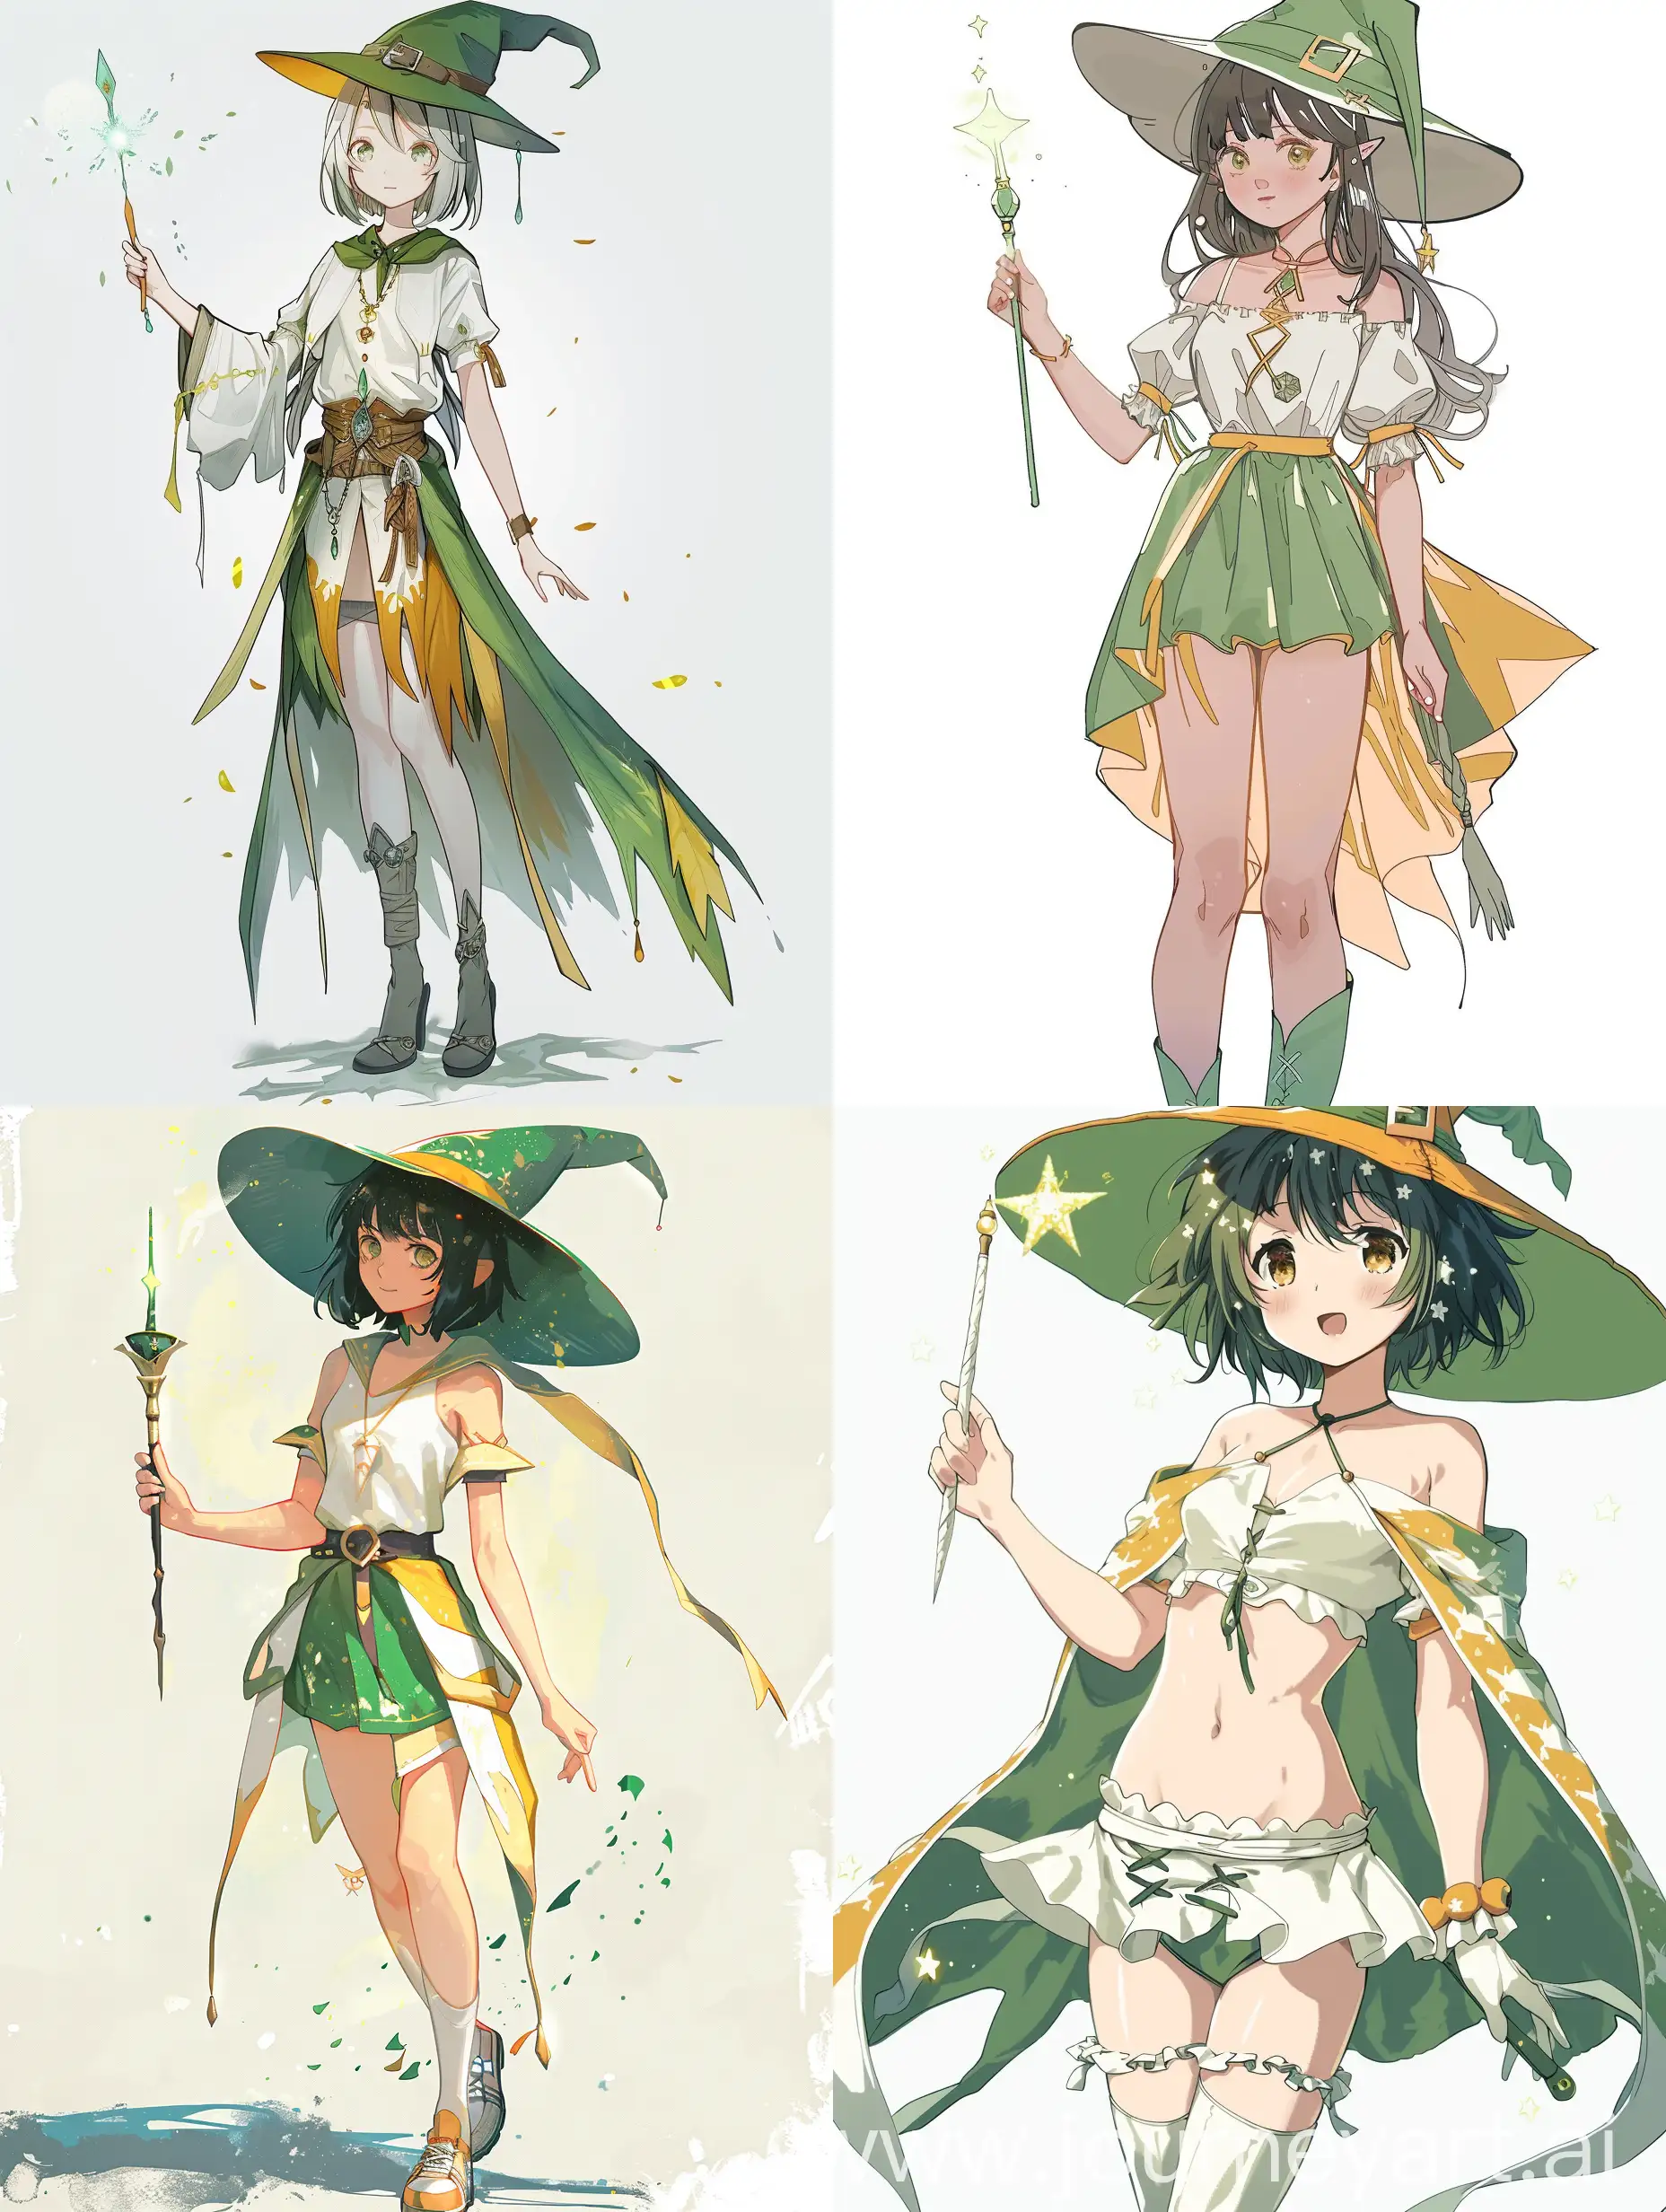 anime girl inspired by a witch outfit holding a magic wand with a simple clothing design. Approximately the girl's age is 18 years old. The color of the outfit is dominated by green, white and yellow